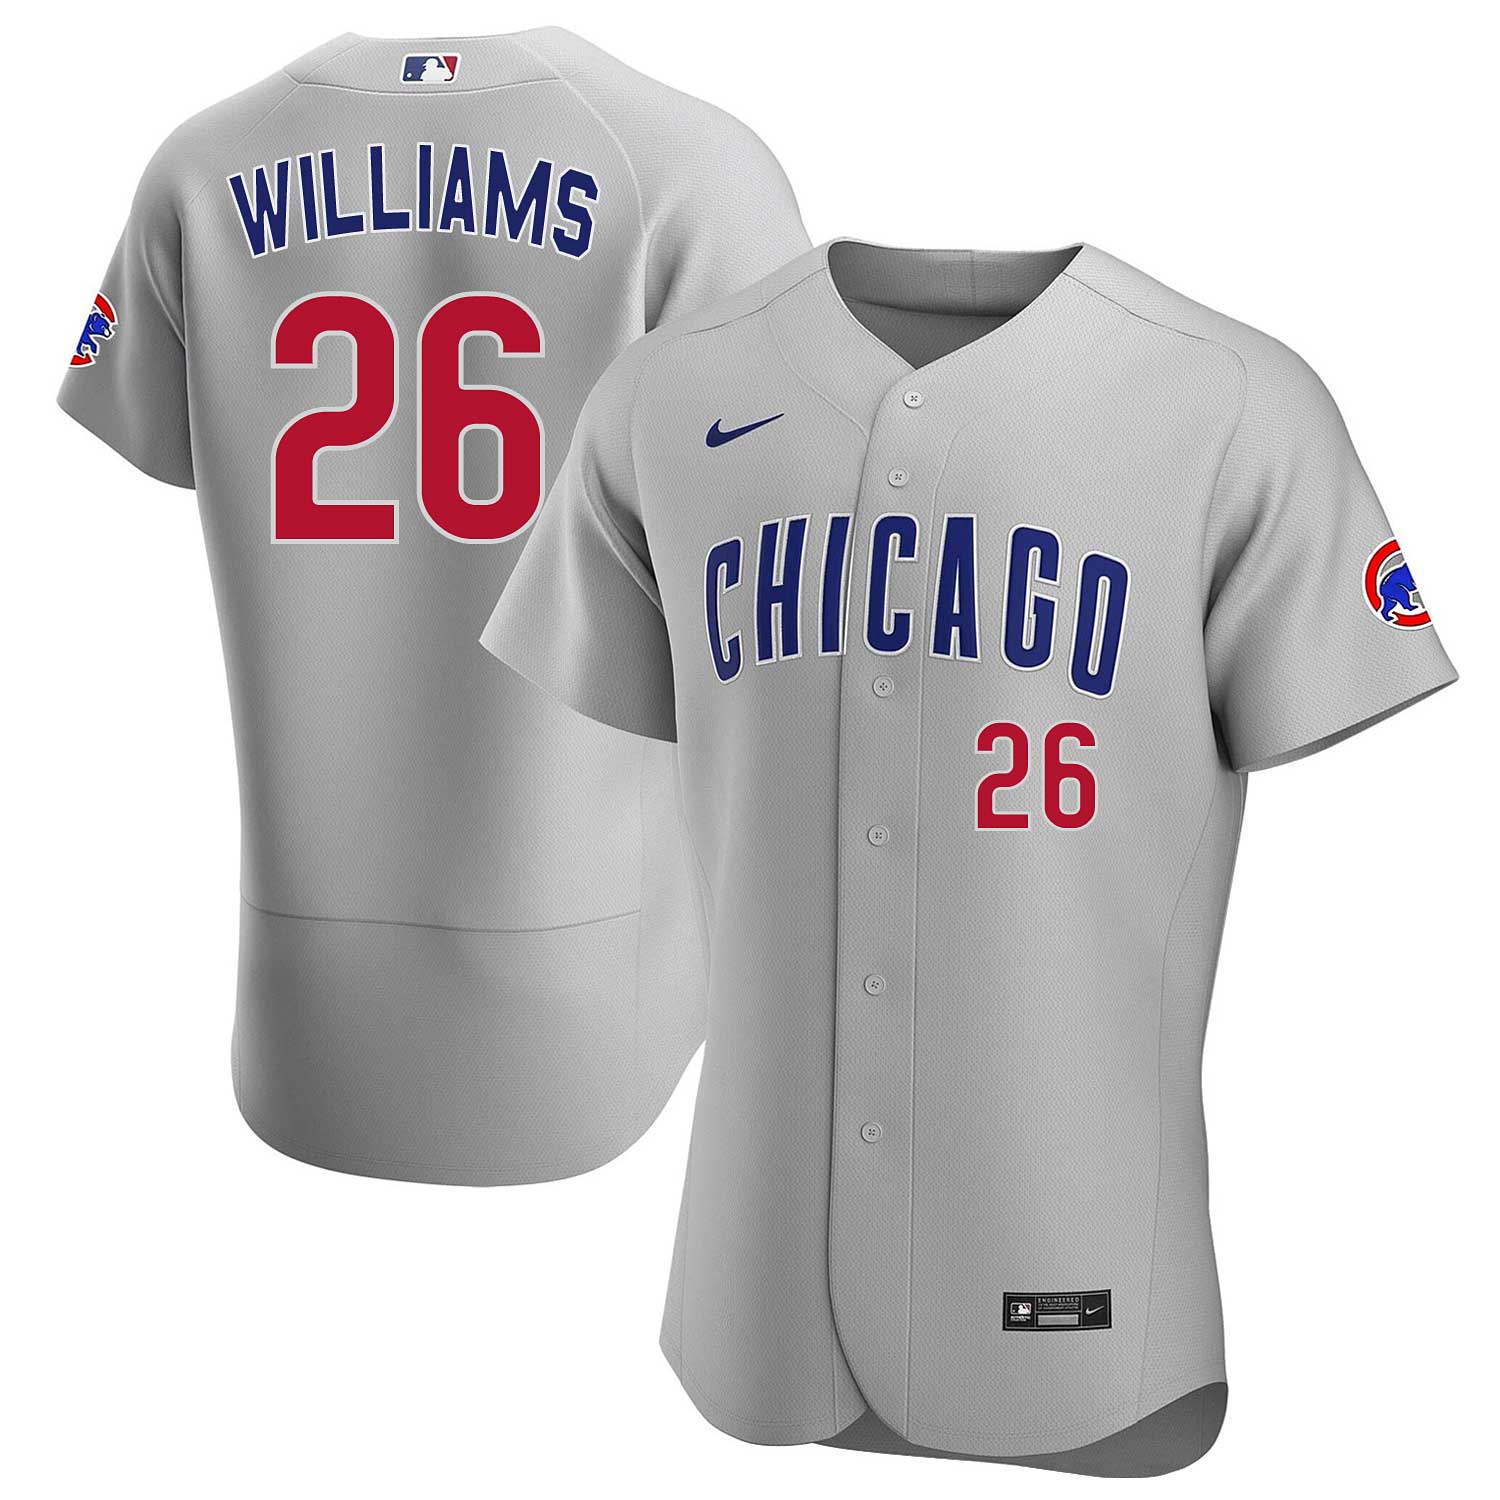 Chicago Cubs Billy Williams Nike Road Authentic Jersey 56 = 3X/4X-Large